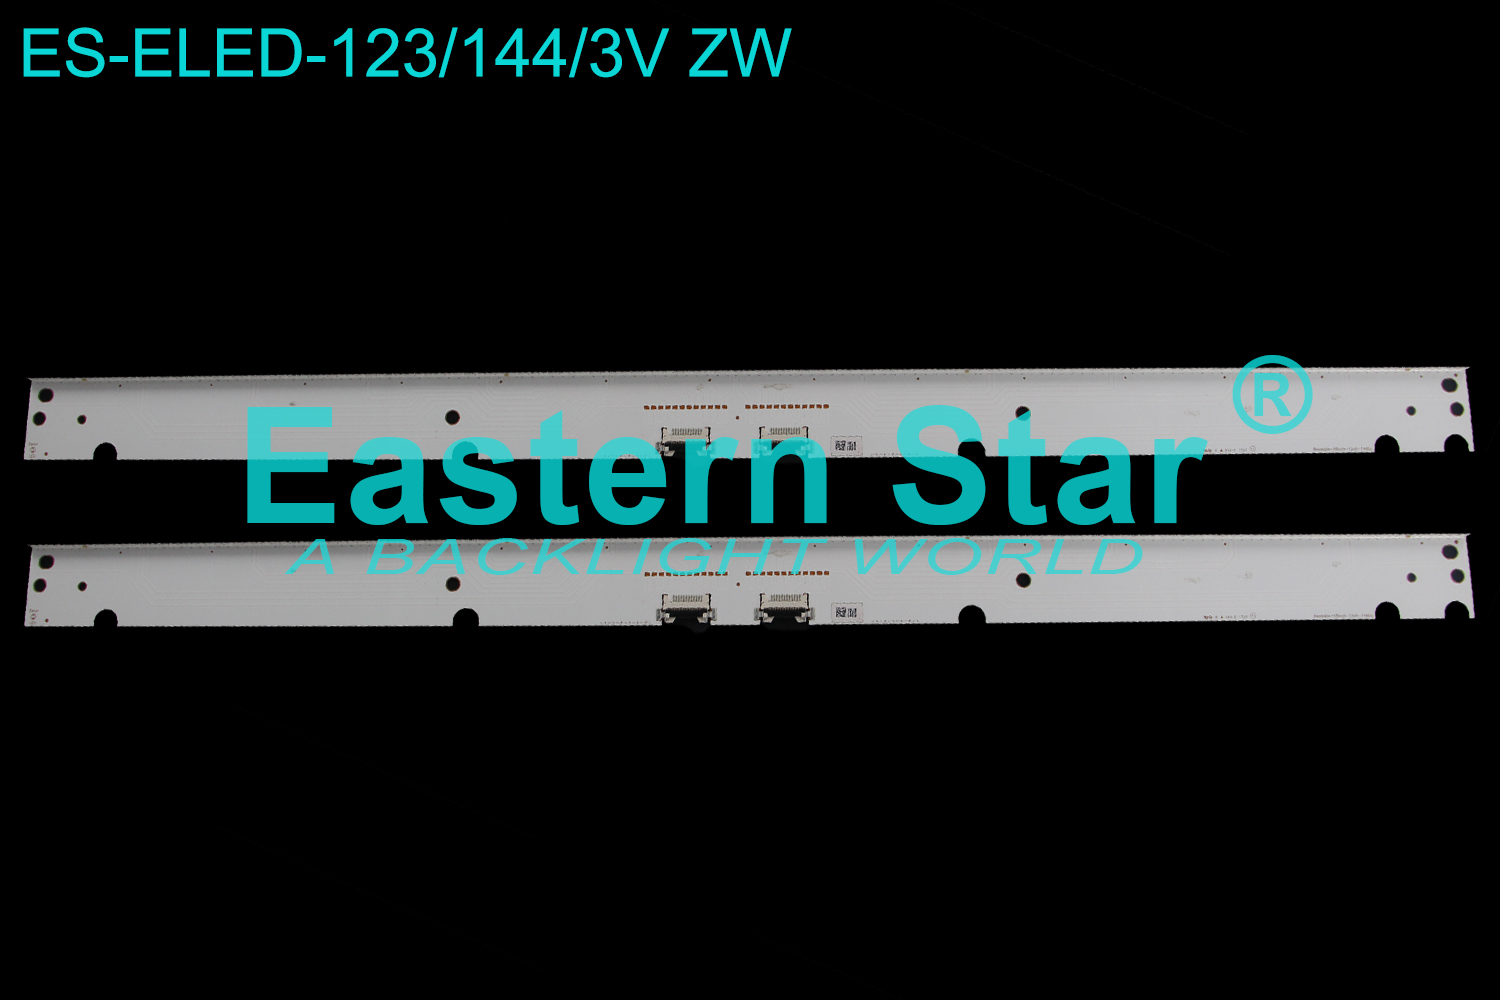 ES-ELED-123 ELED/EDGE TV backlight 55" use for Samsung Bendable-55inch-12ch-144Ea (/)